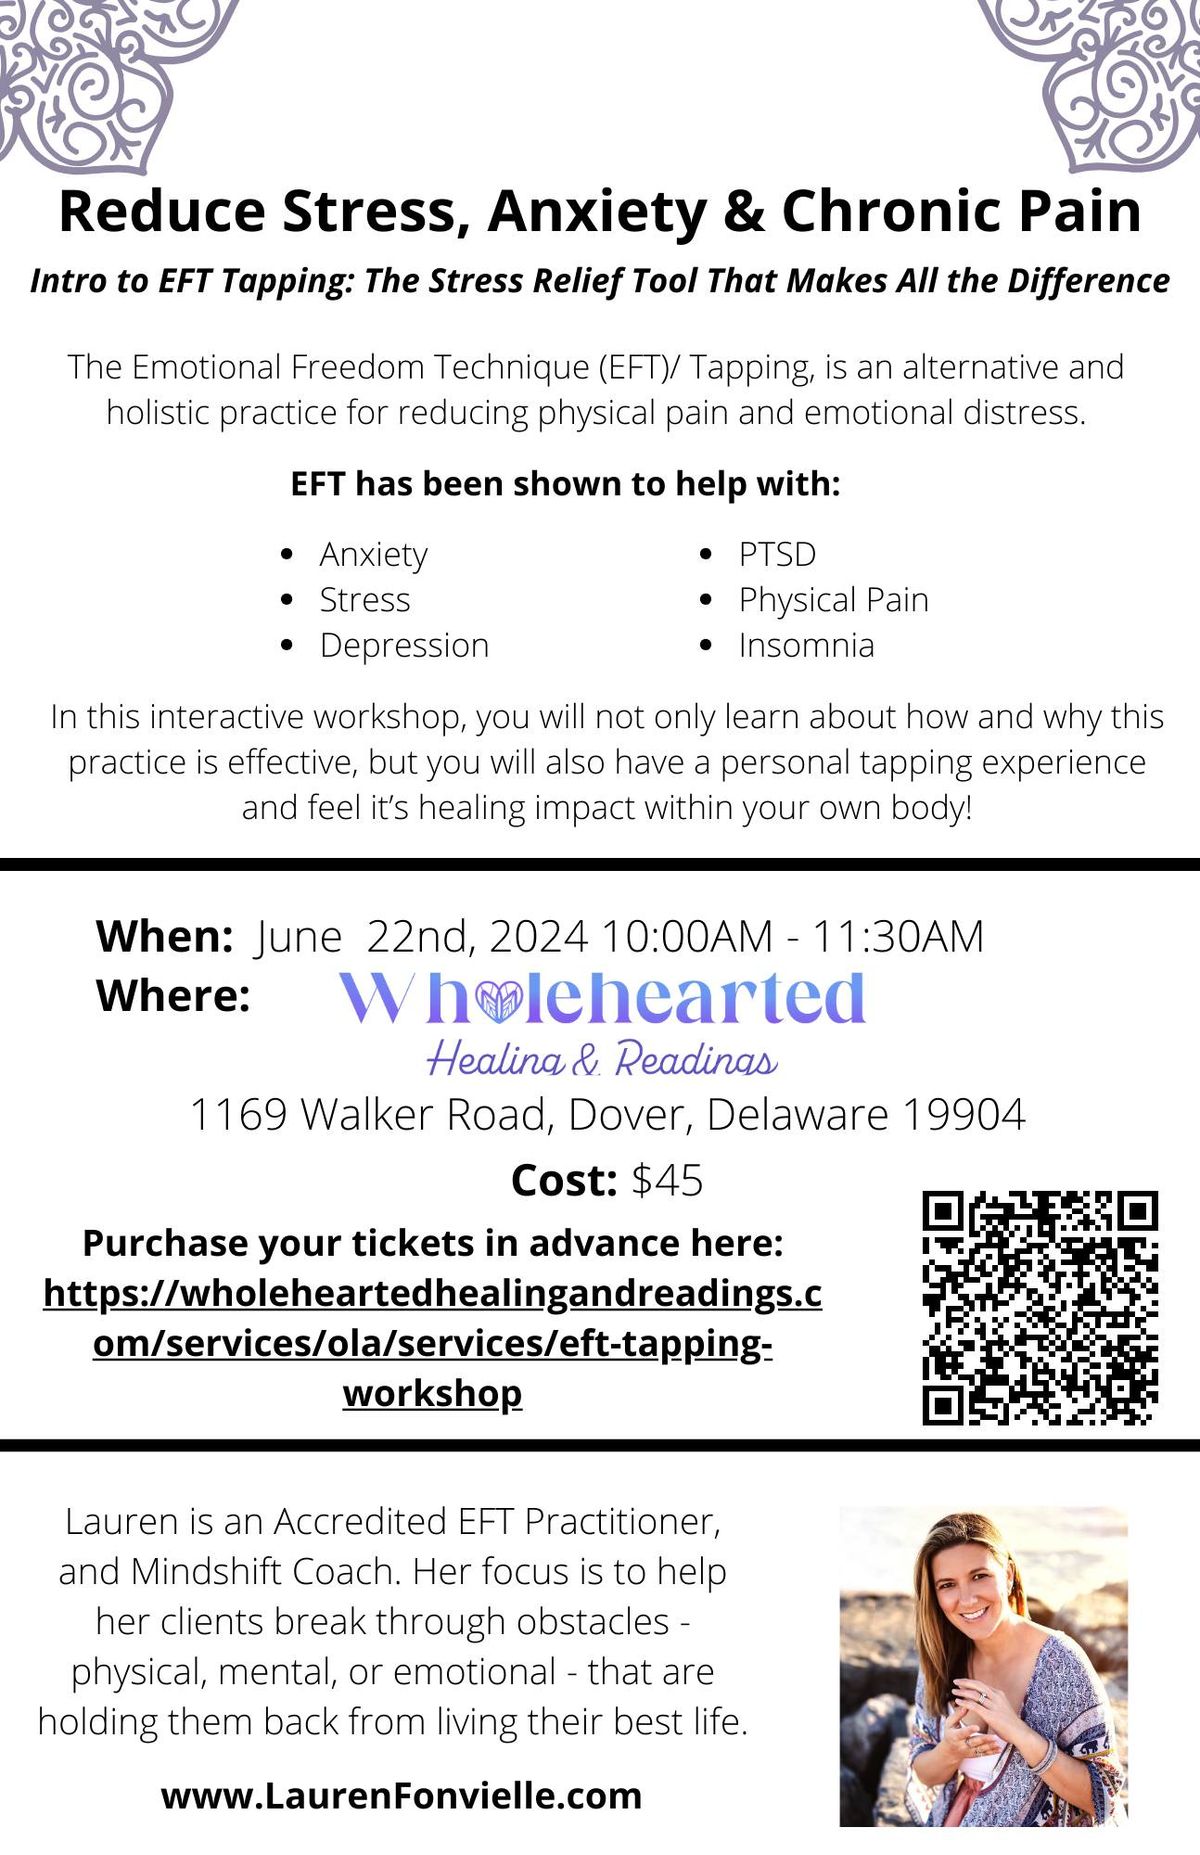 EFT Tapping Workshop With Lauren Fonvielle